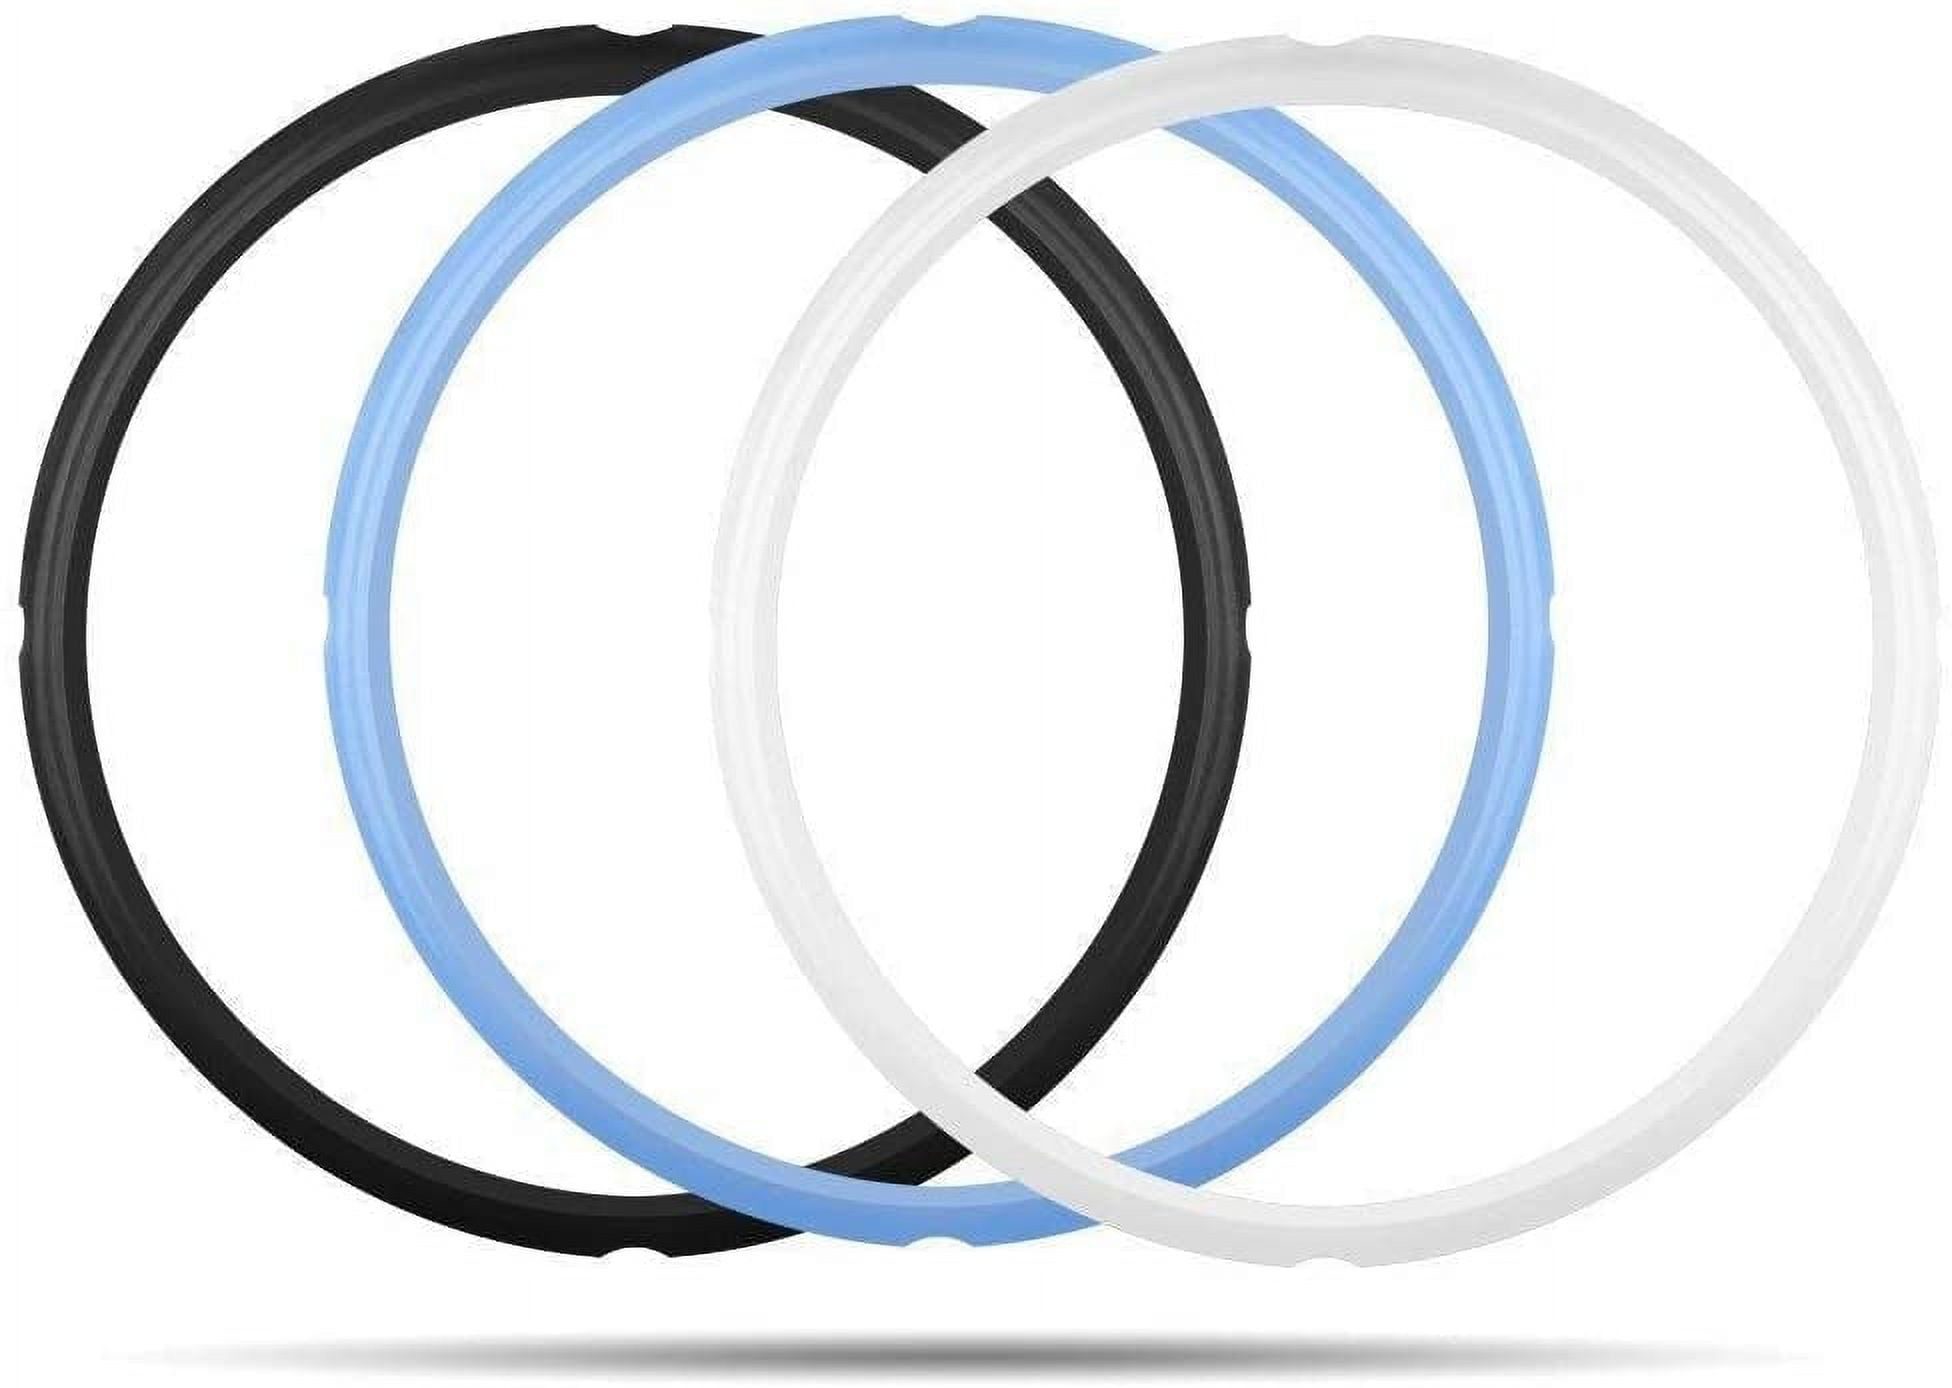 Pack of 2 Silicone Sealing Rings for Instant Pot - Fits Ip-duo60